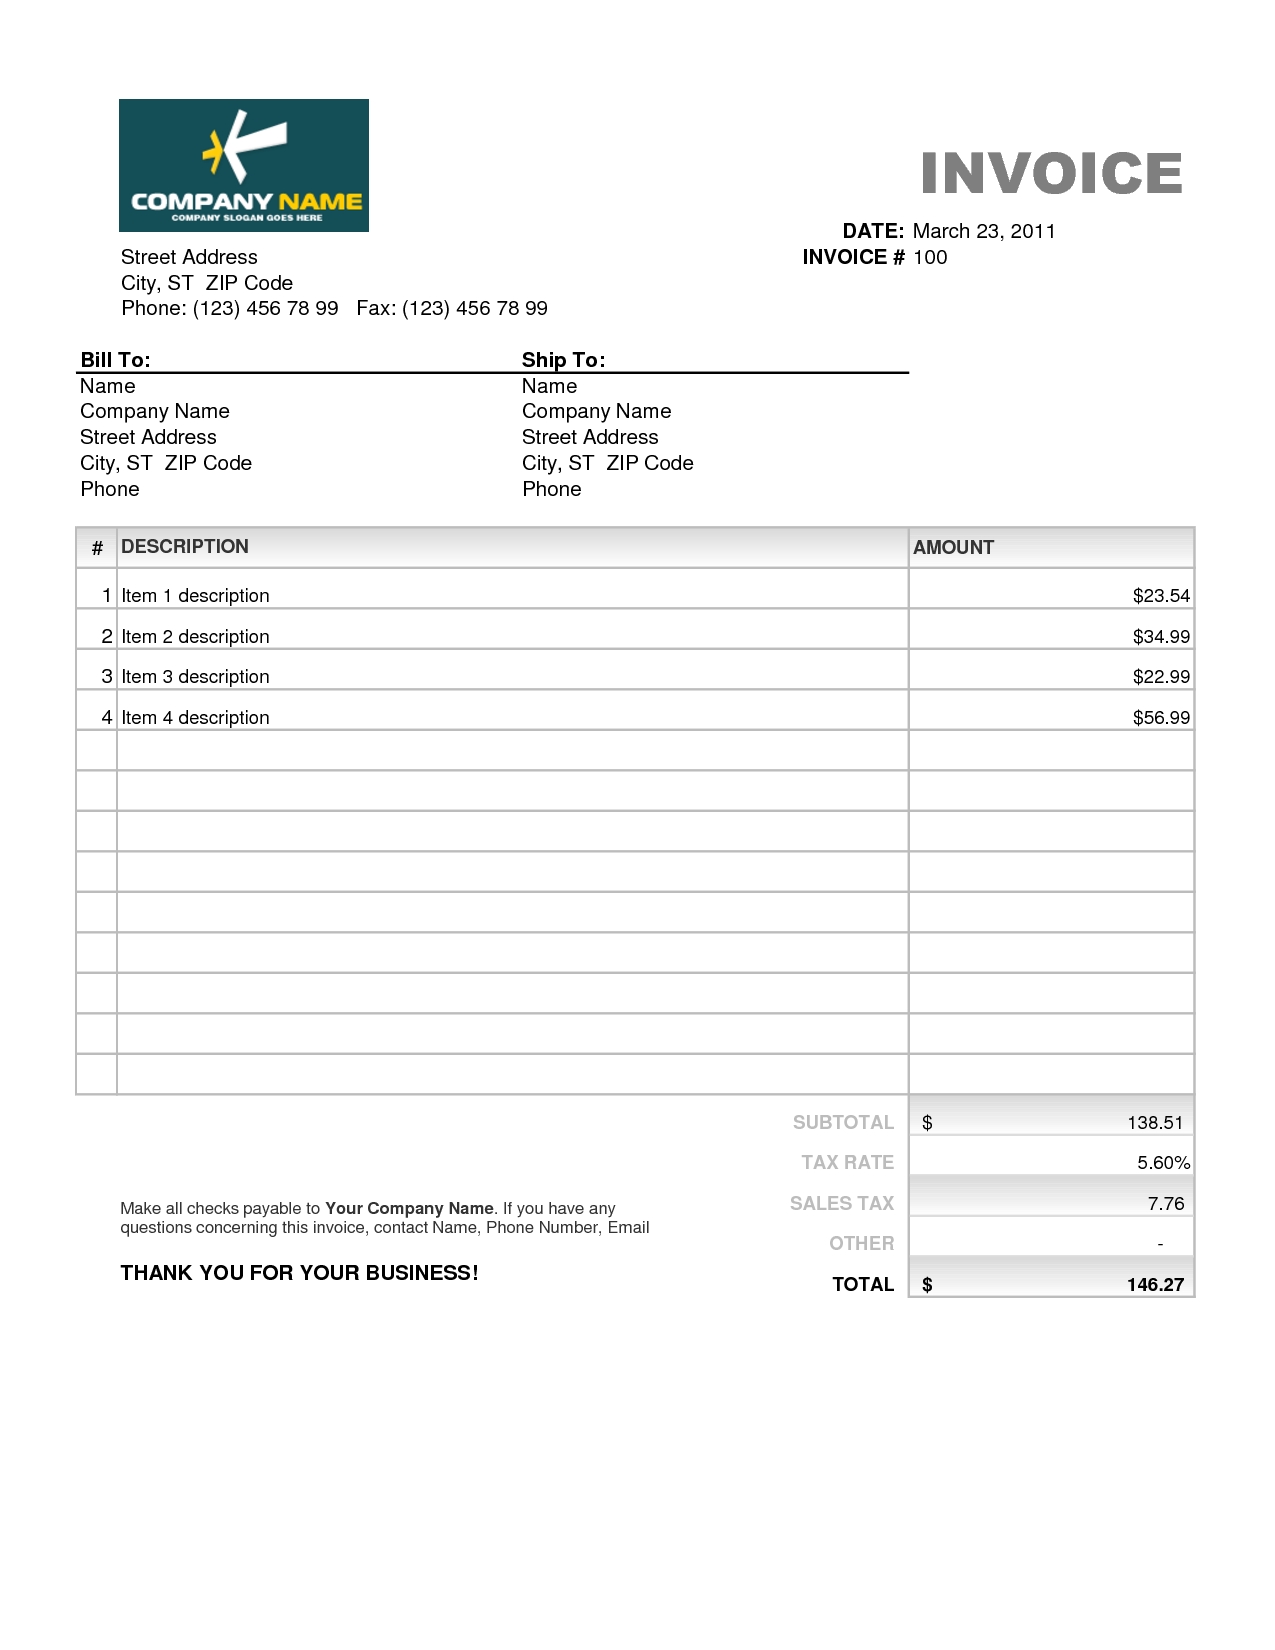 invoice template excel download free l vusashop free excel invoice template download